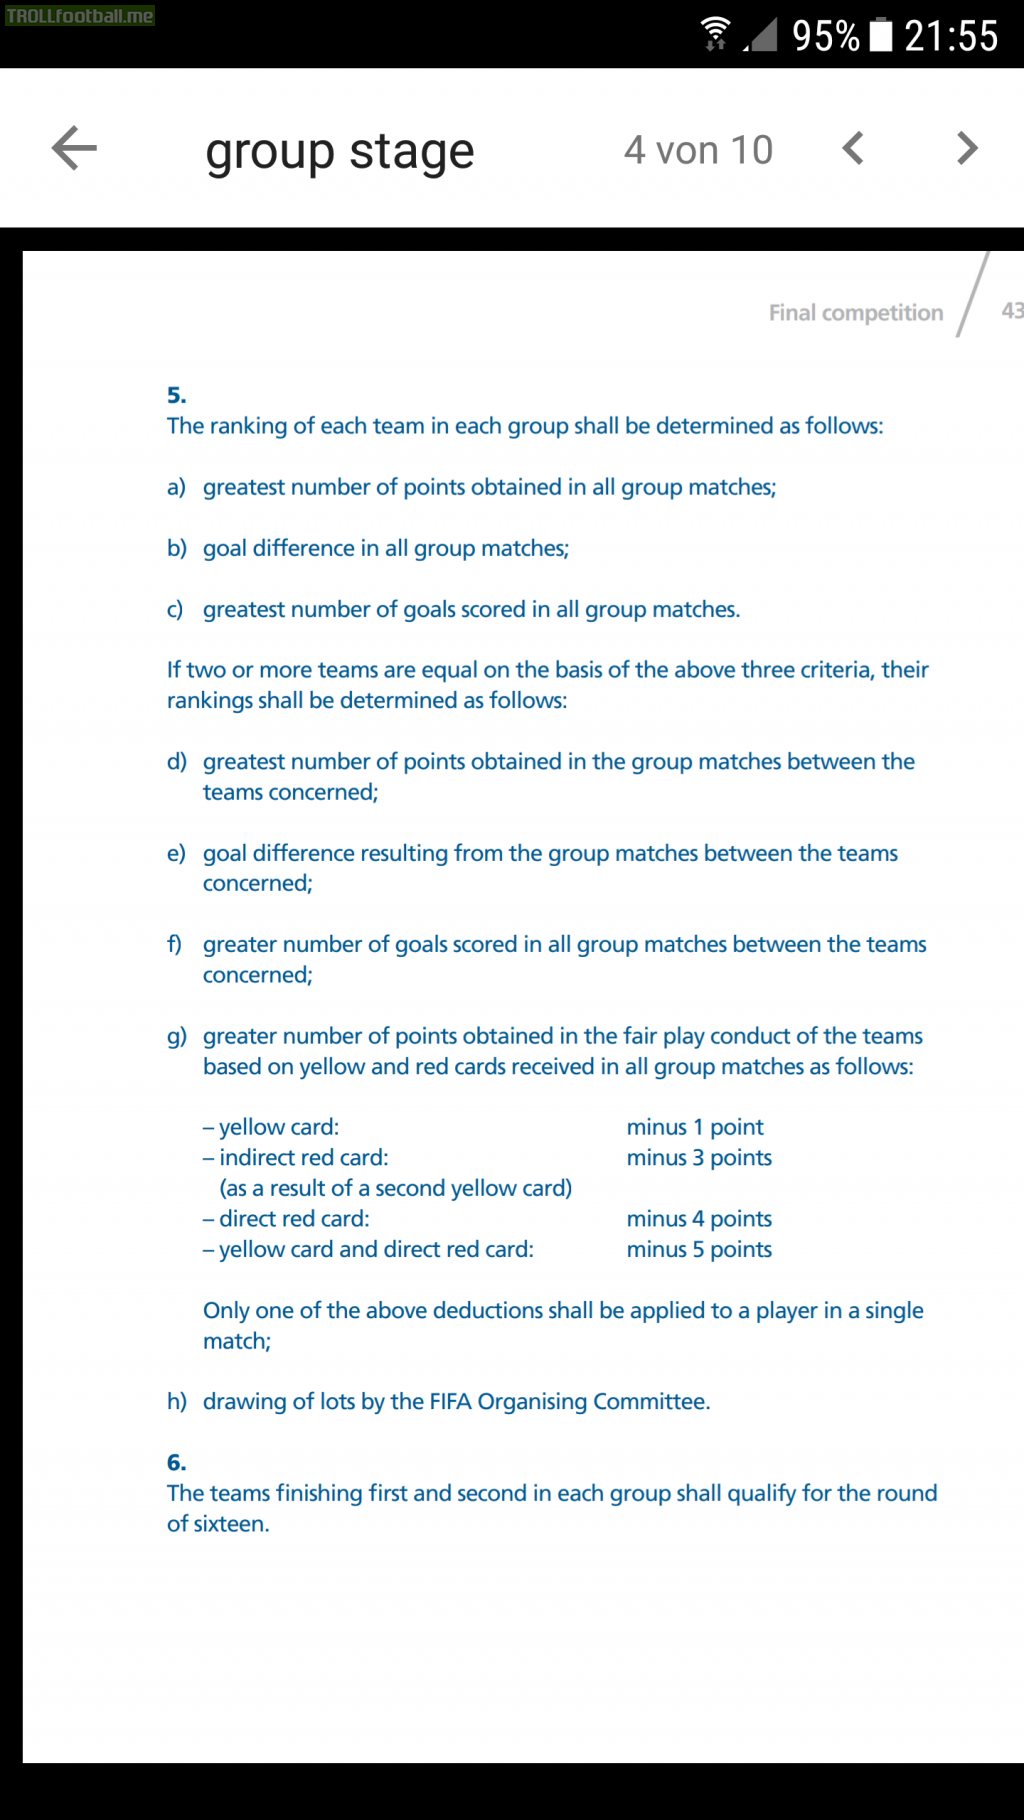 Should Spain and Portugal get the same result in their 3rd and final game of the group stage and have an equal Fair Play Conduct, drawing of lots by the FIFA Organising Committee will decide, who wins the group. [Source: 2018 FIFA World Cup regulations - UEFA.com]